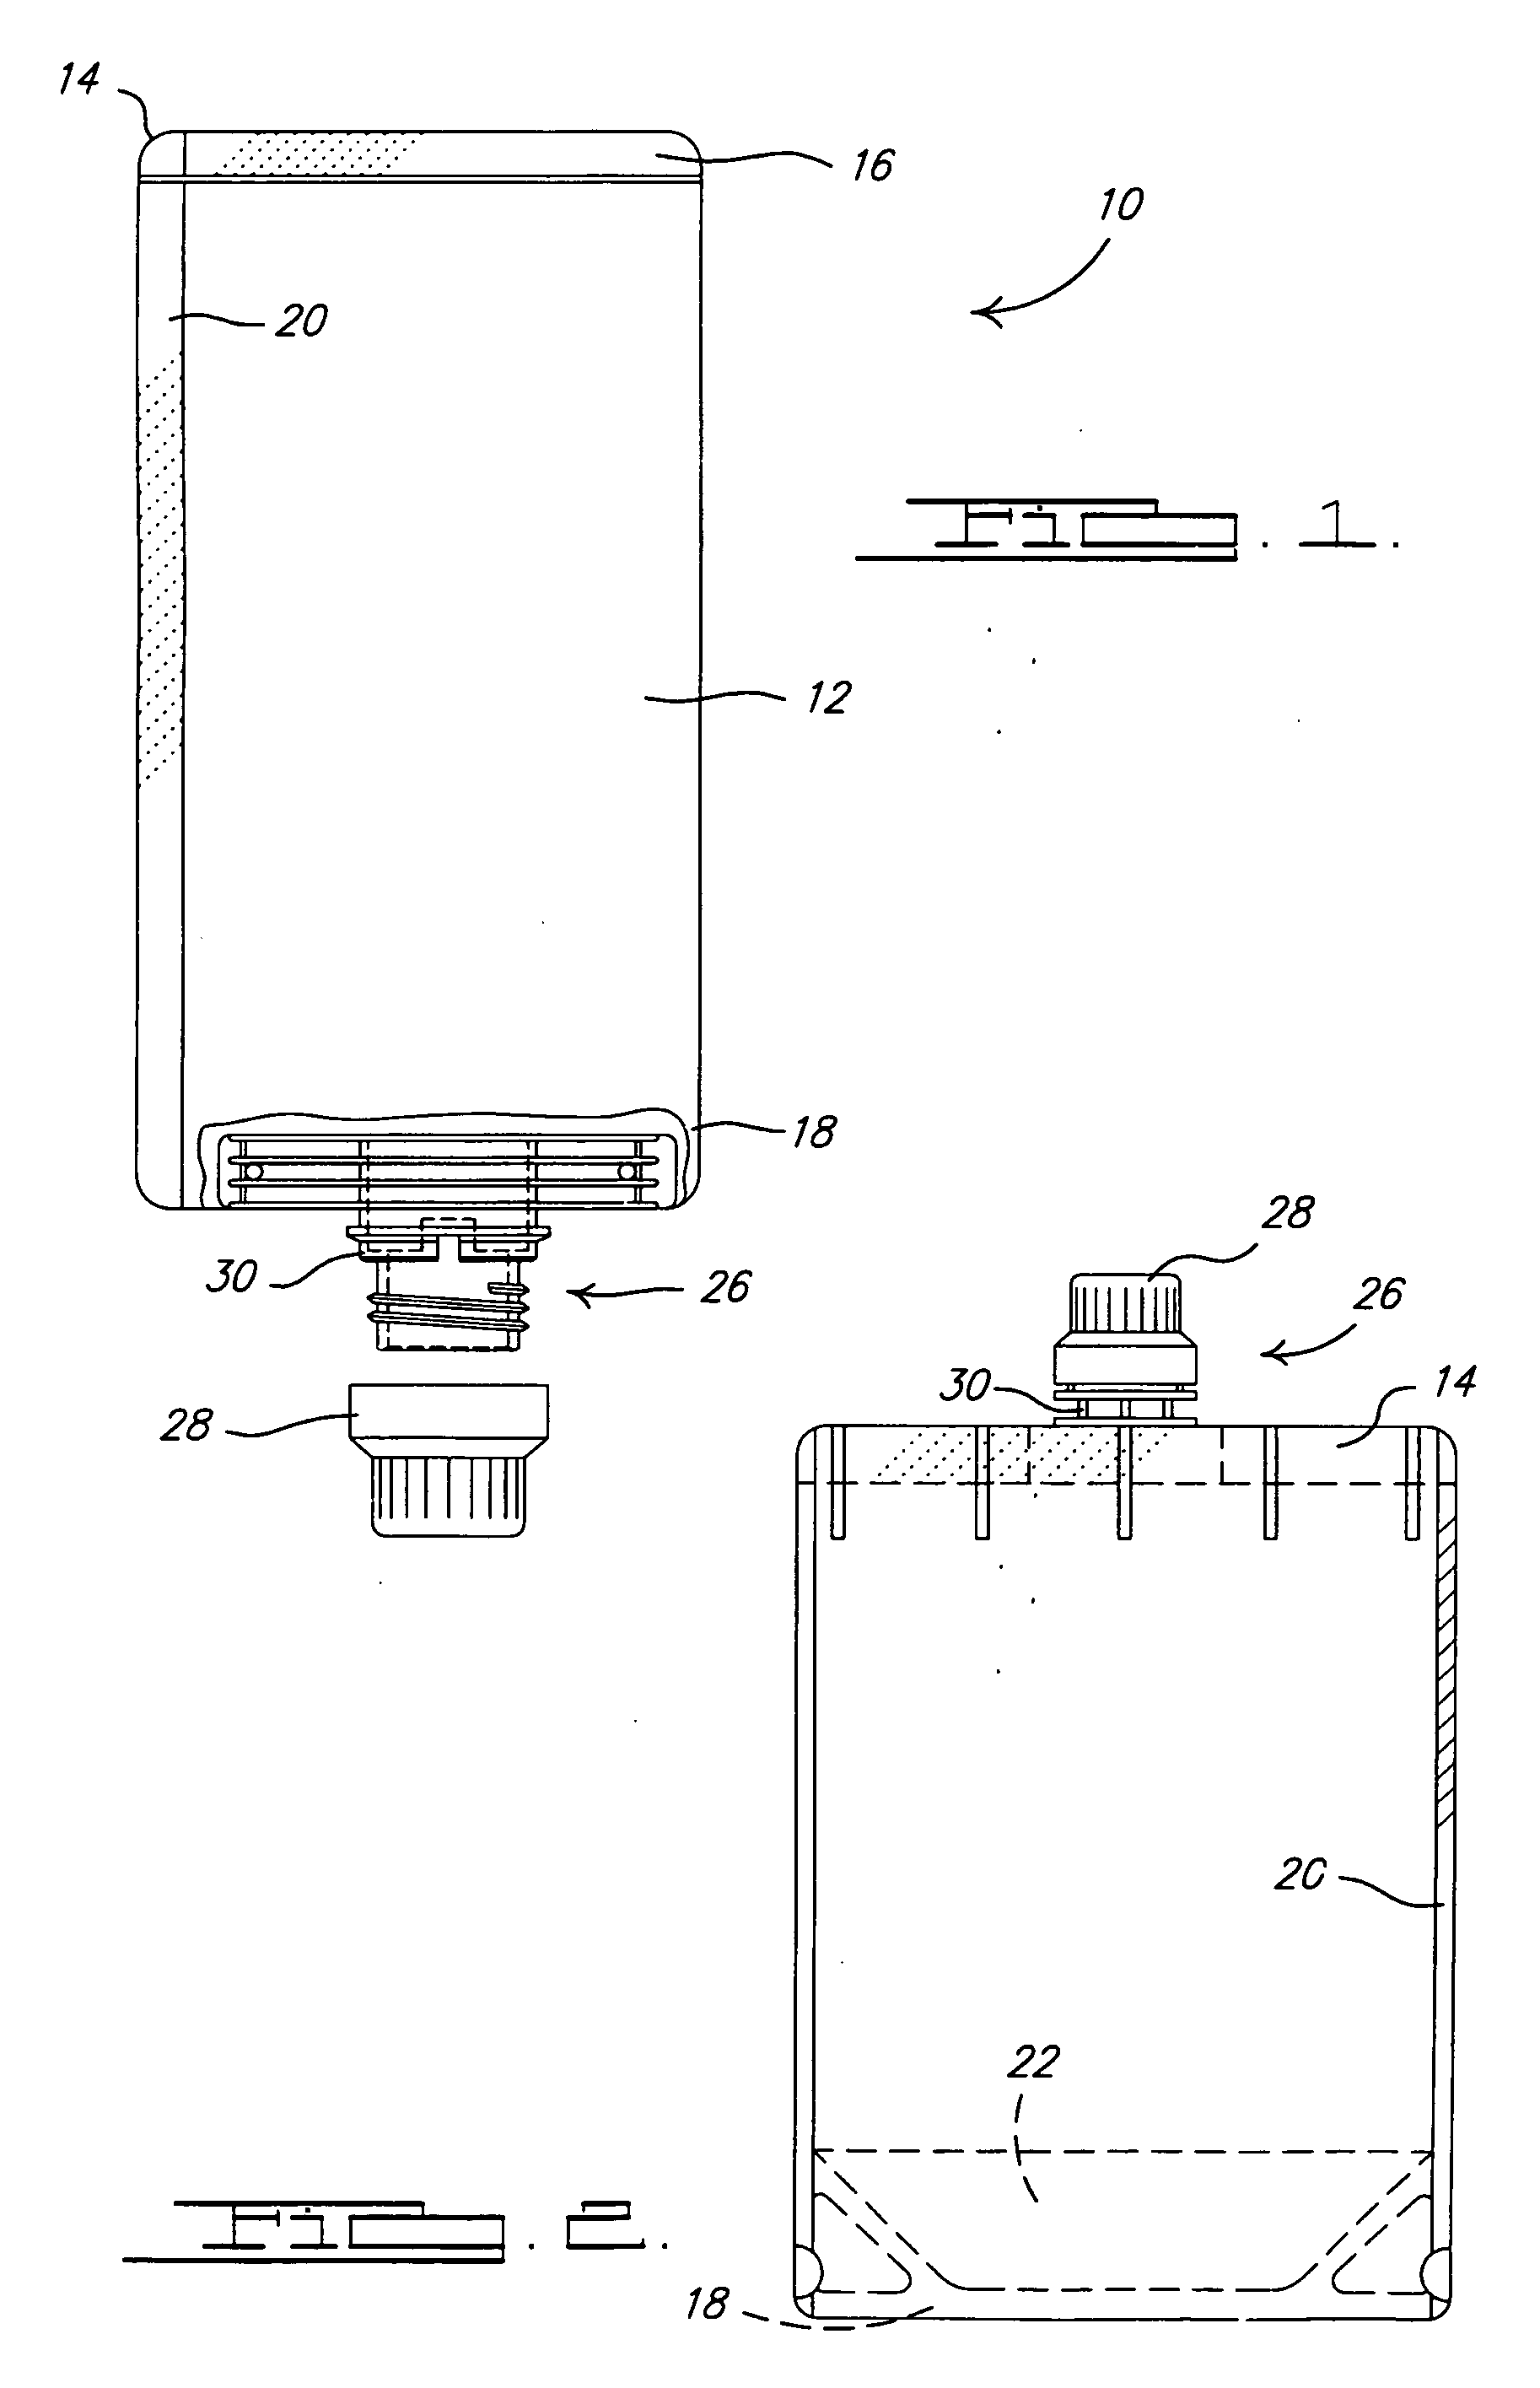 Apparatus and method of filling a flexible pouch with extended shelf life